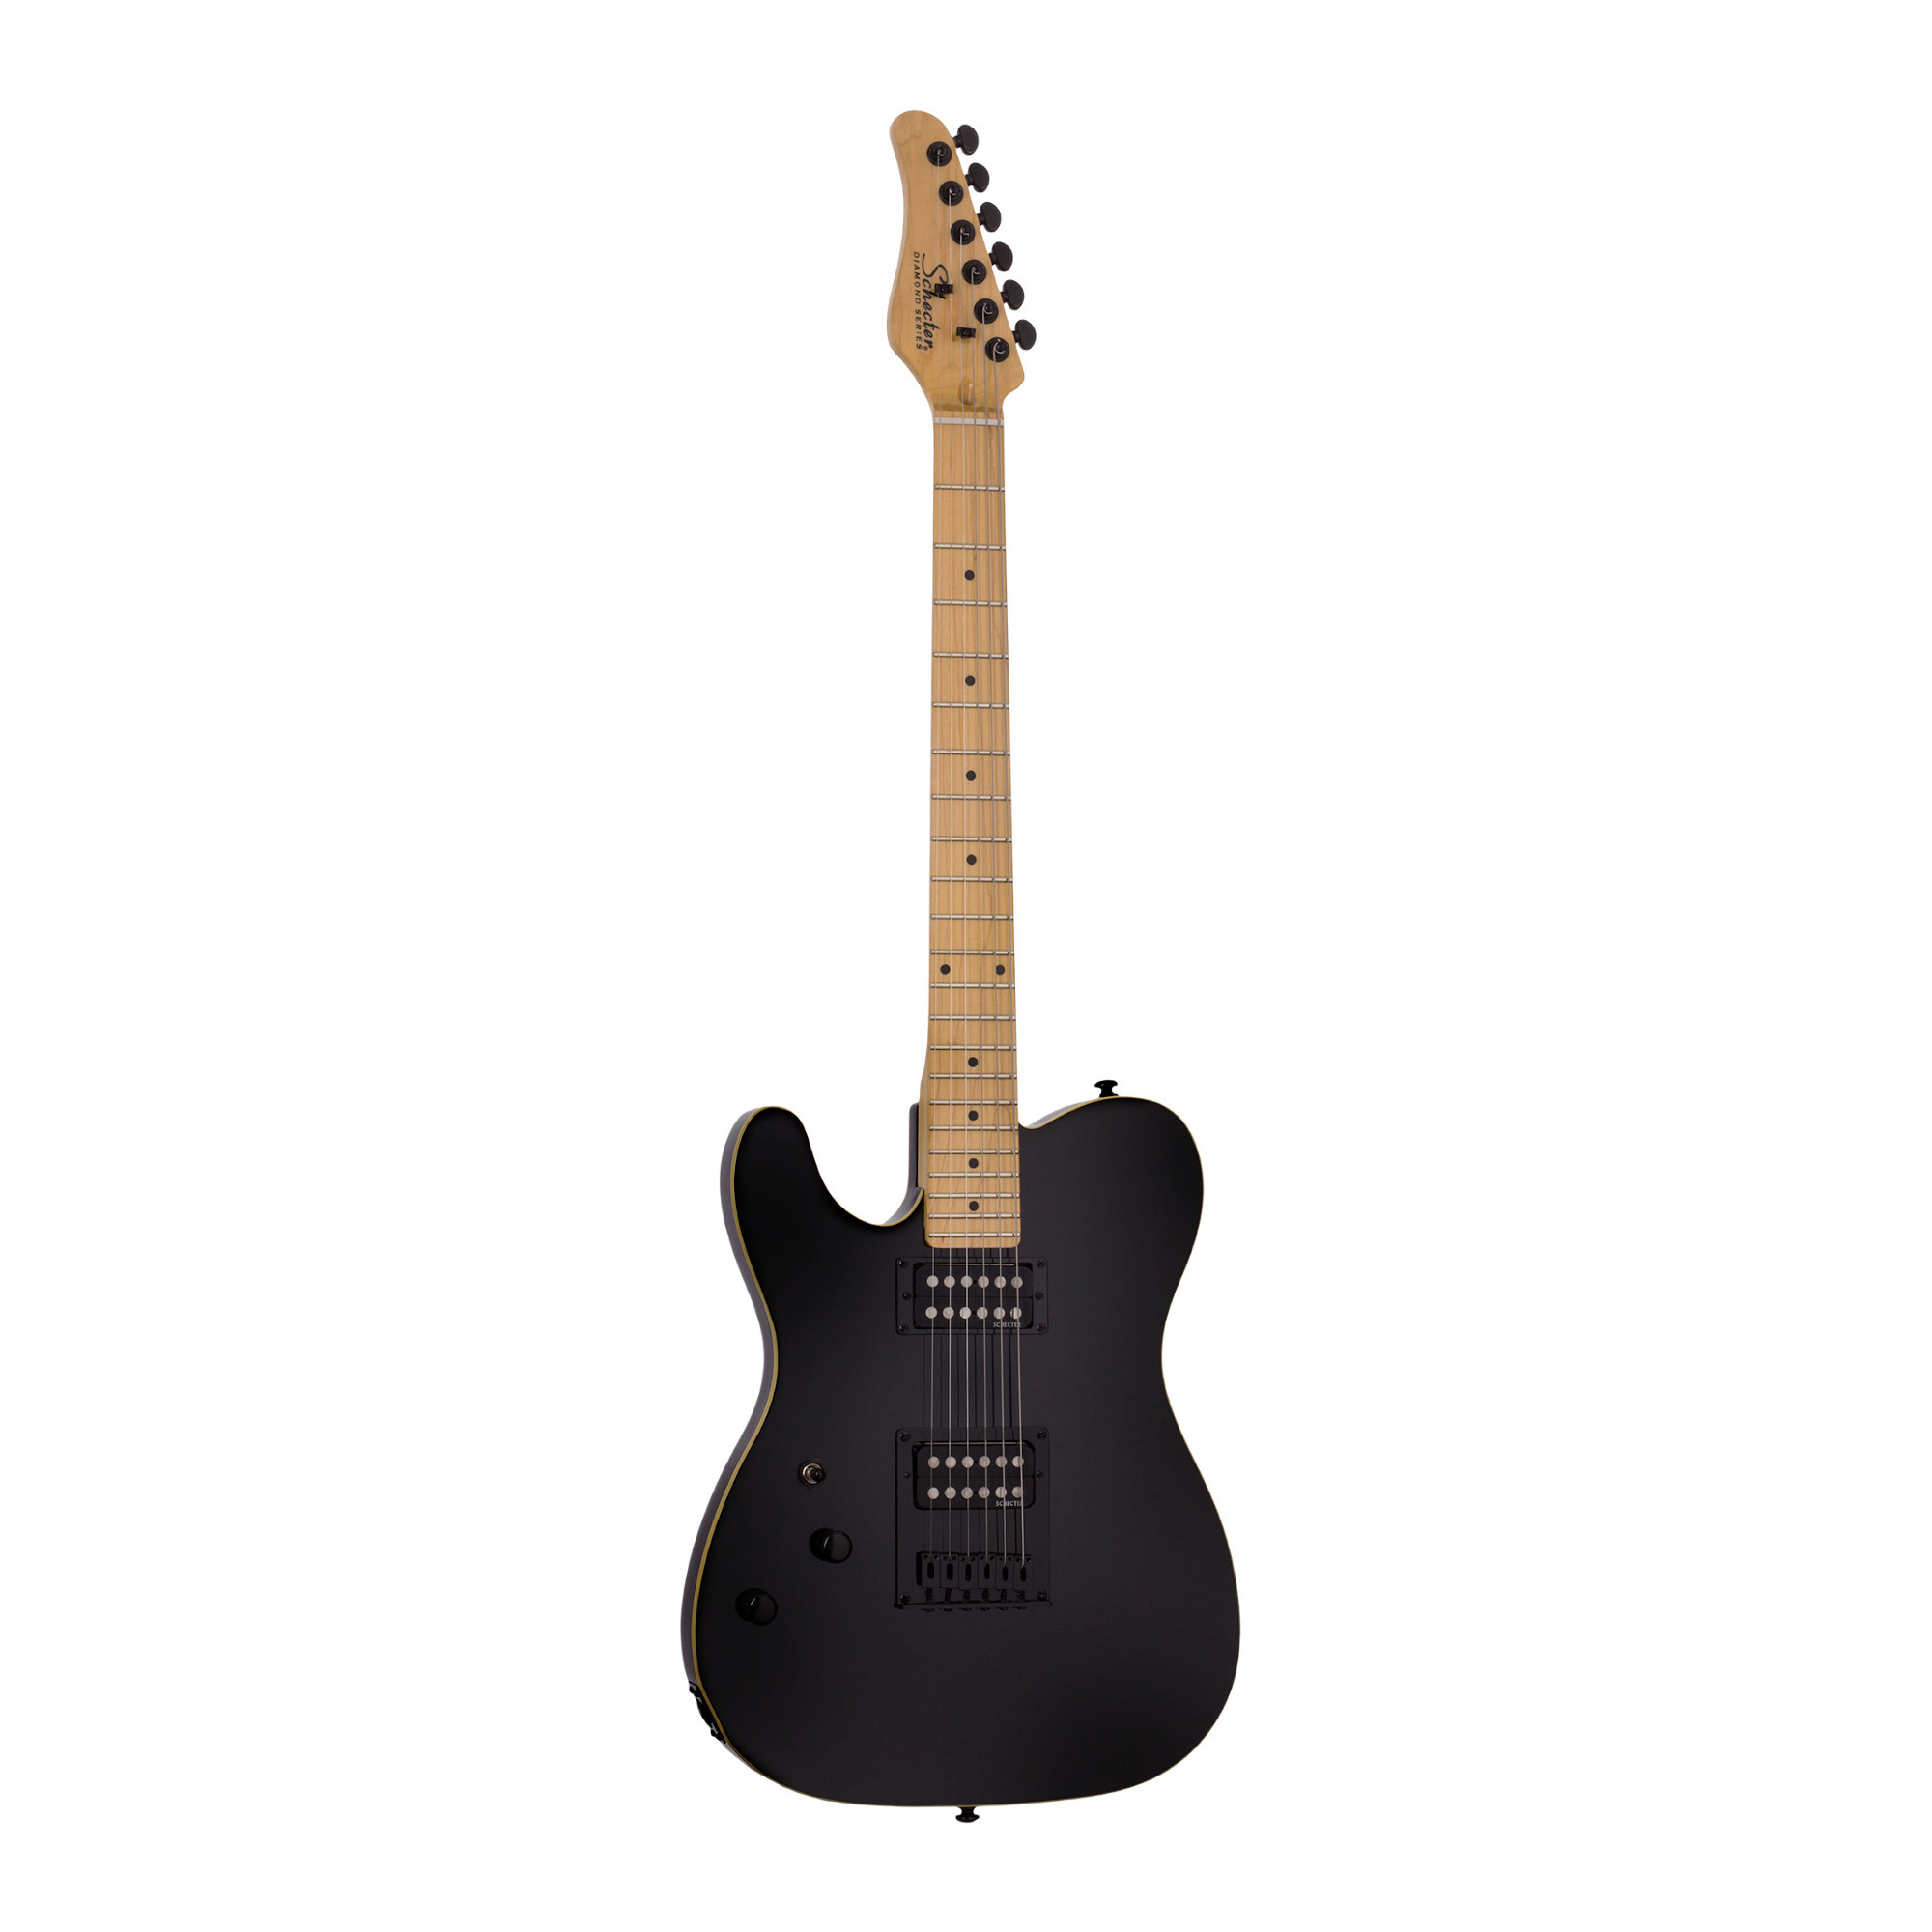 Schecter PT Left-Handed 6-String Electric Guitar in Gloss Black -  2200